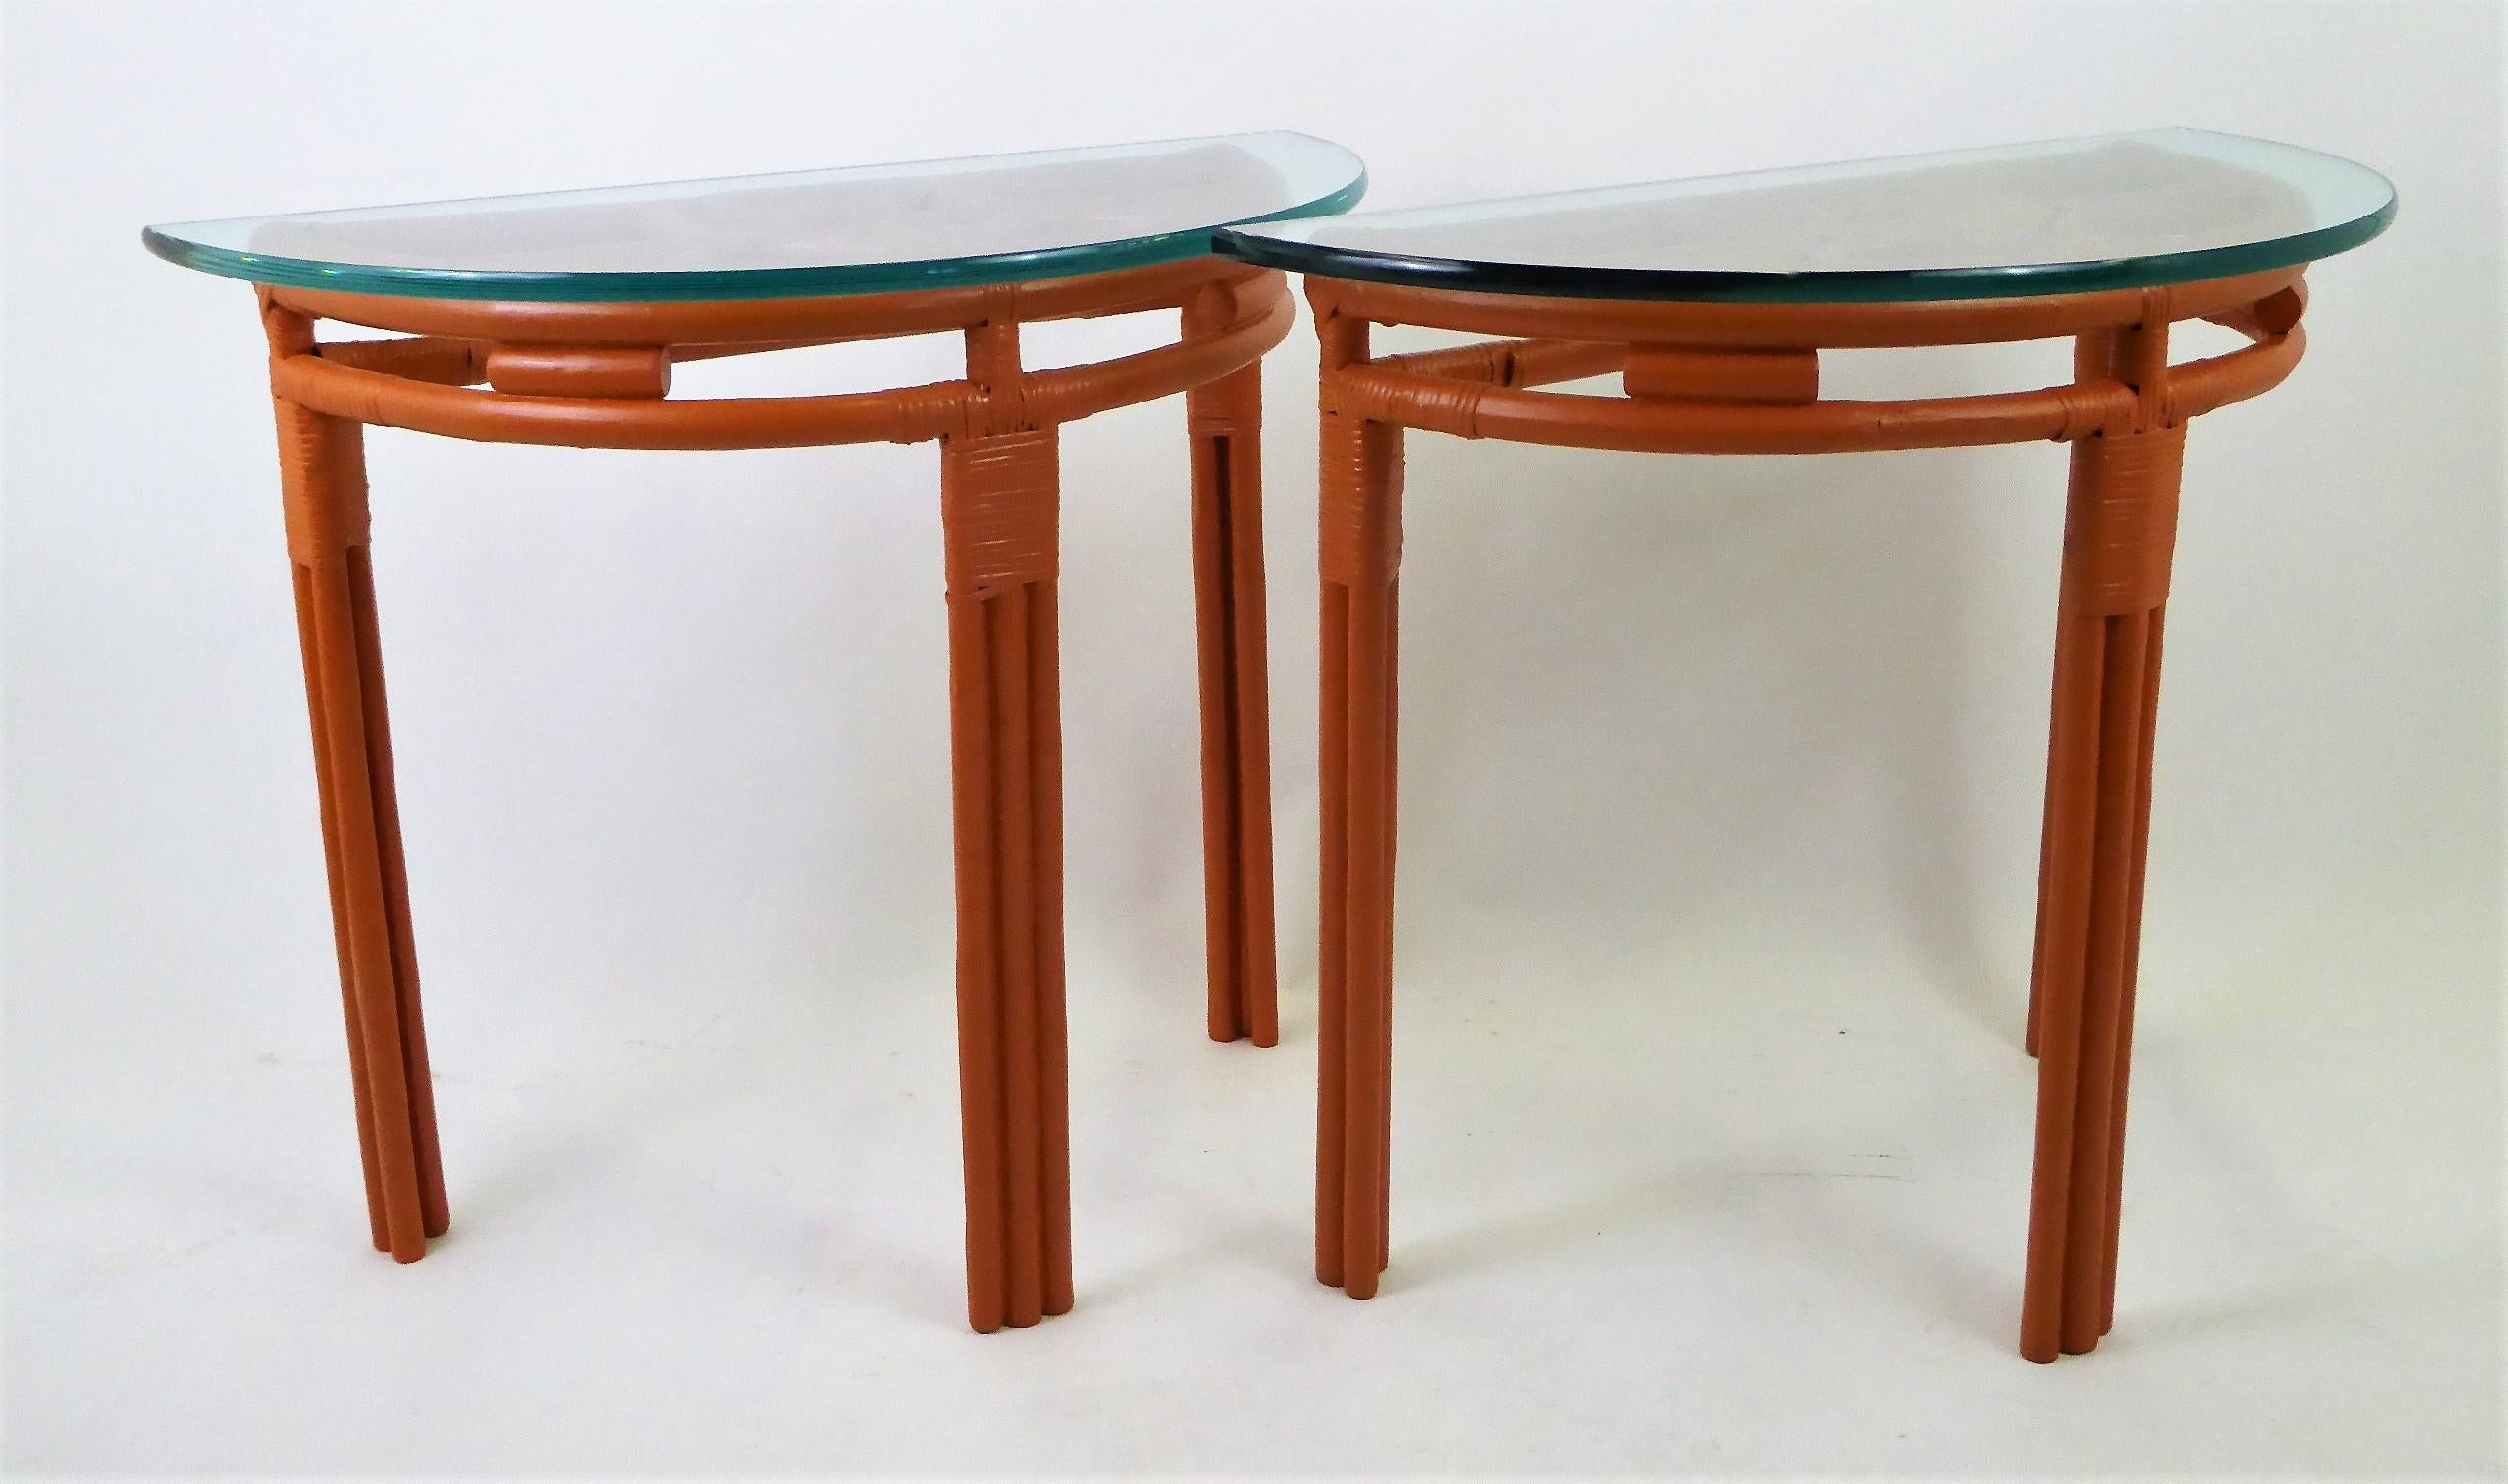 1940s Painted Rattan Demilune Glass Top Consoles in Hermes Orange 1